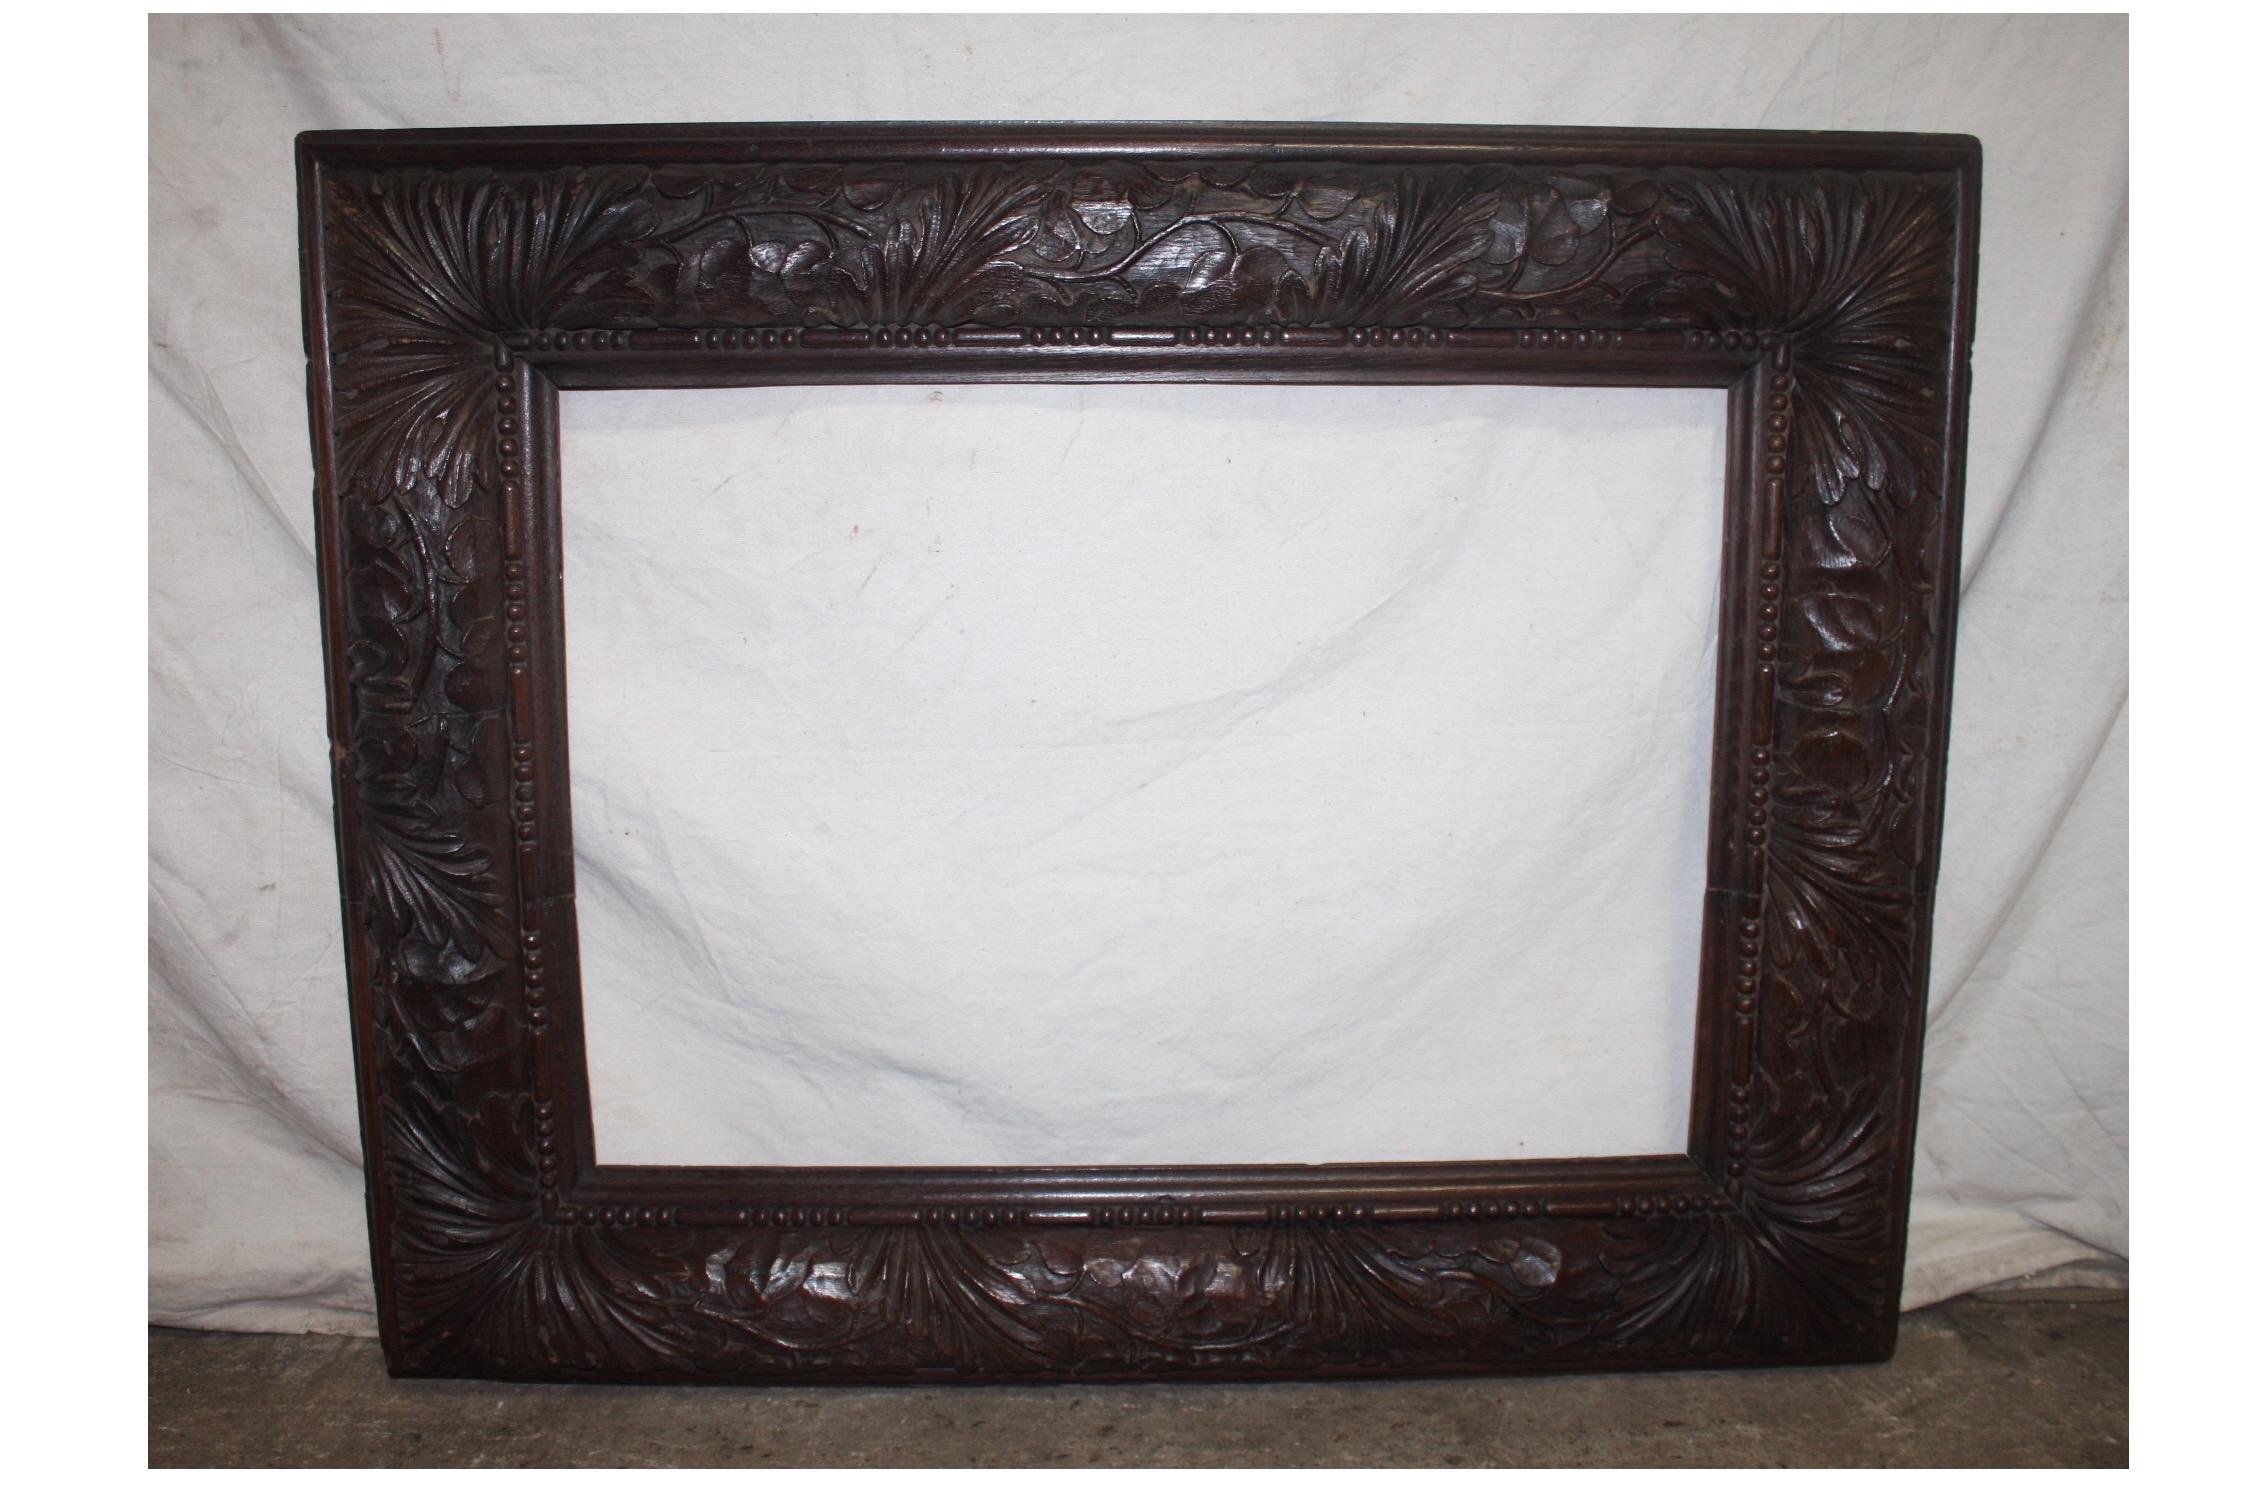 French early 19th century wood frame
Dimensions of the inside frame (where the painting is placed) 30.5” W x 21.75” H.